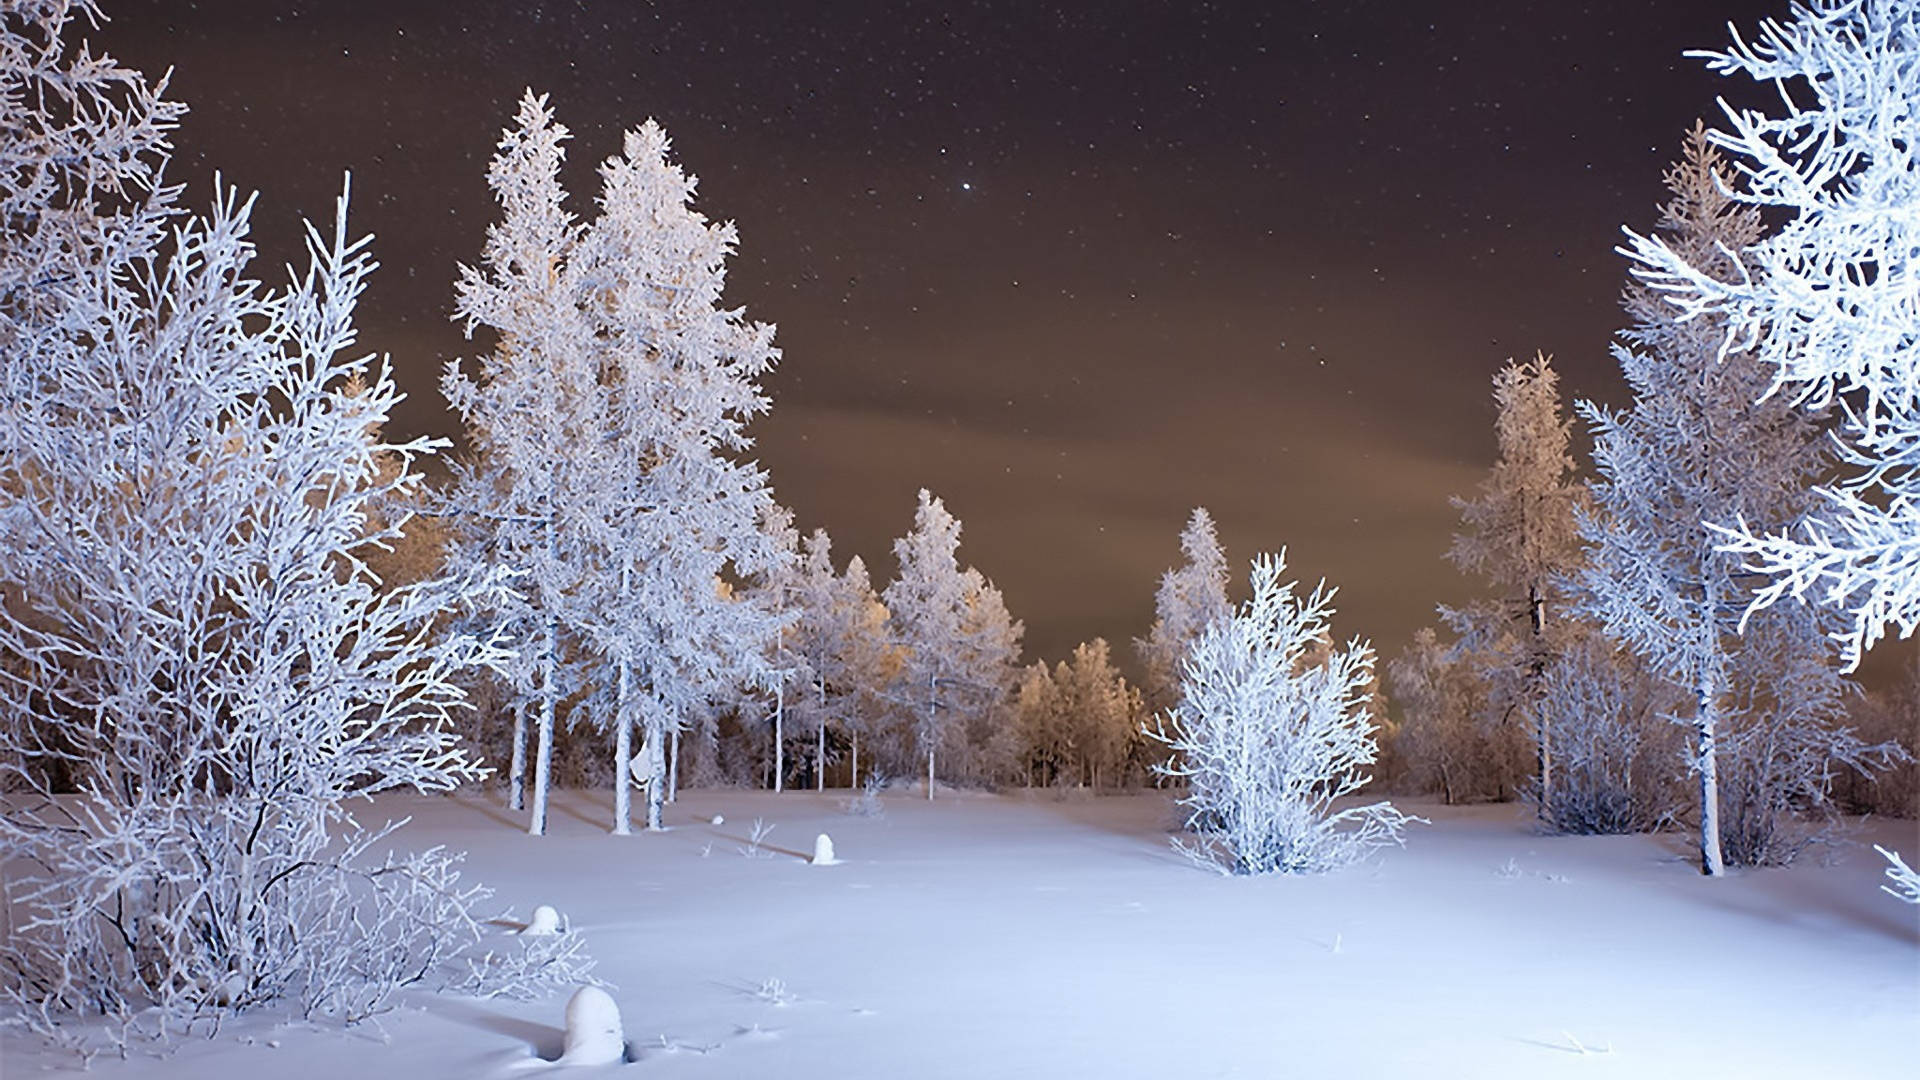 Enjoy The Beauty of the Winter with Amazing 4K Wallpaper Wallpaper